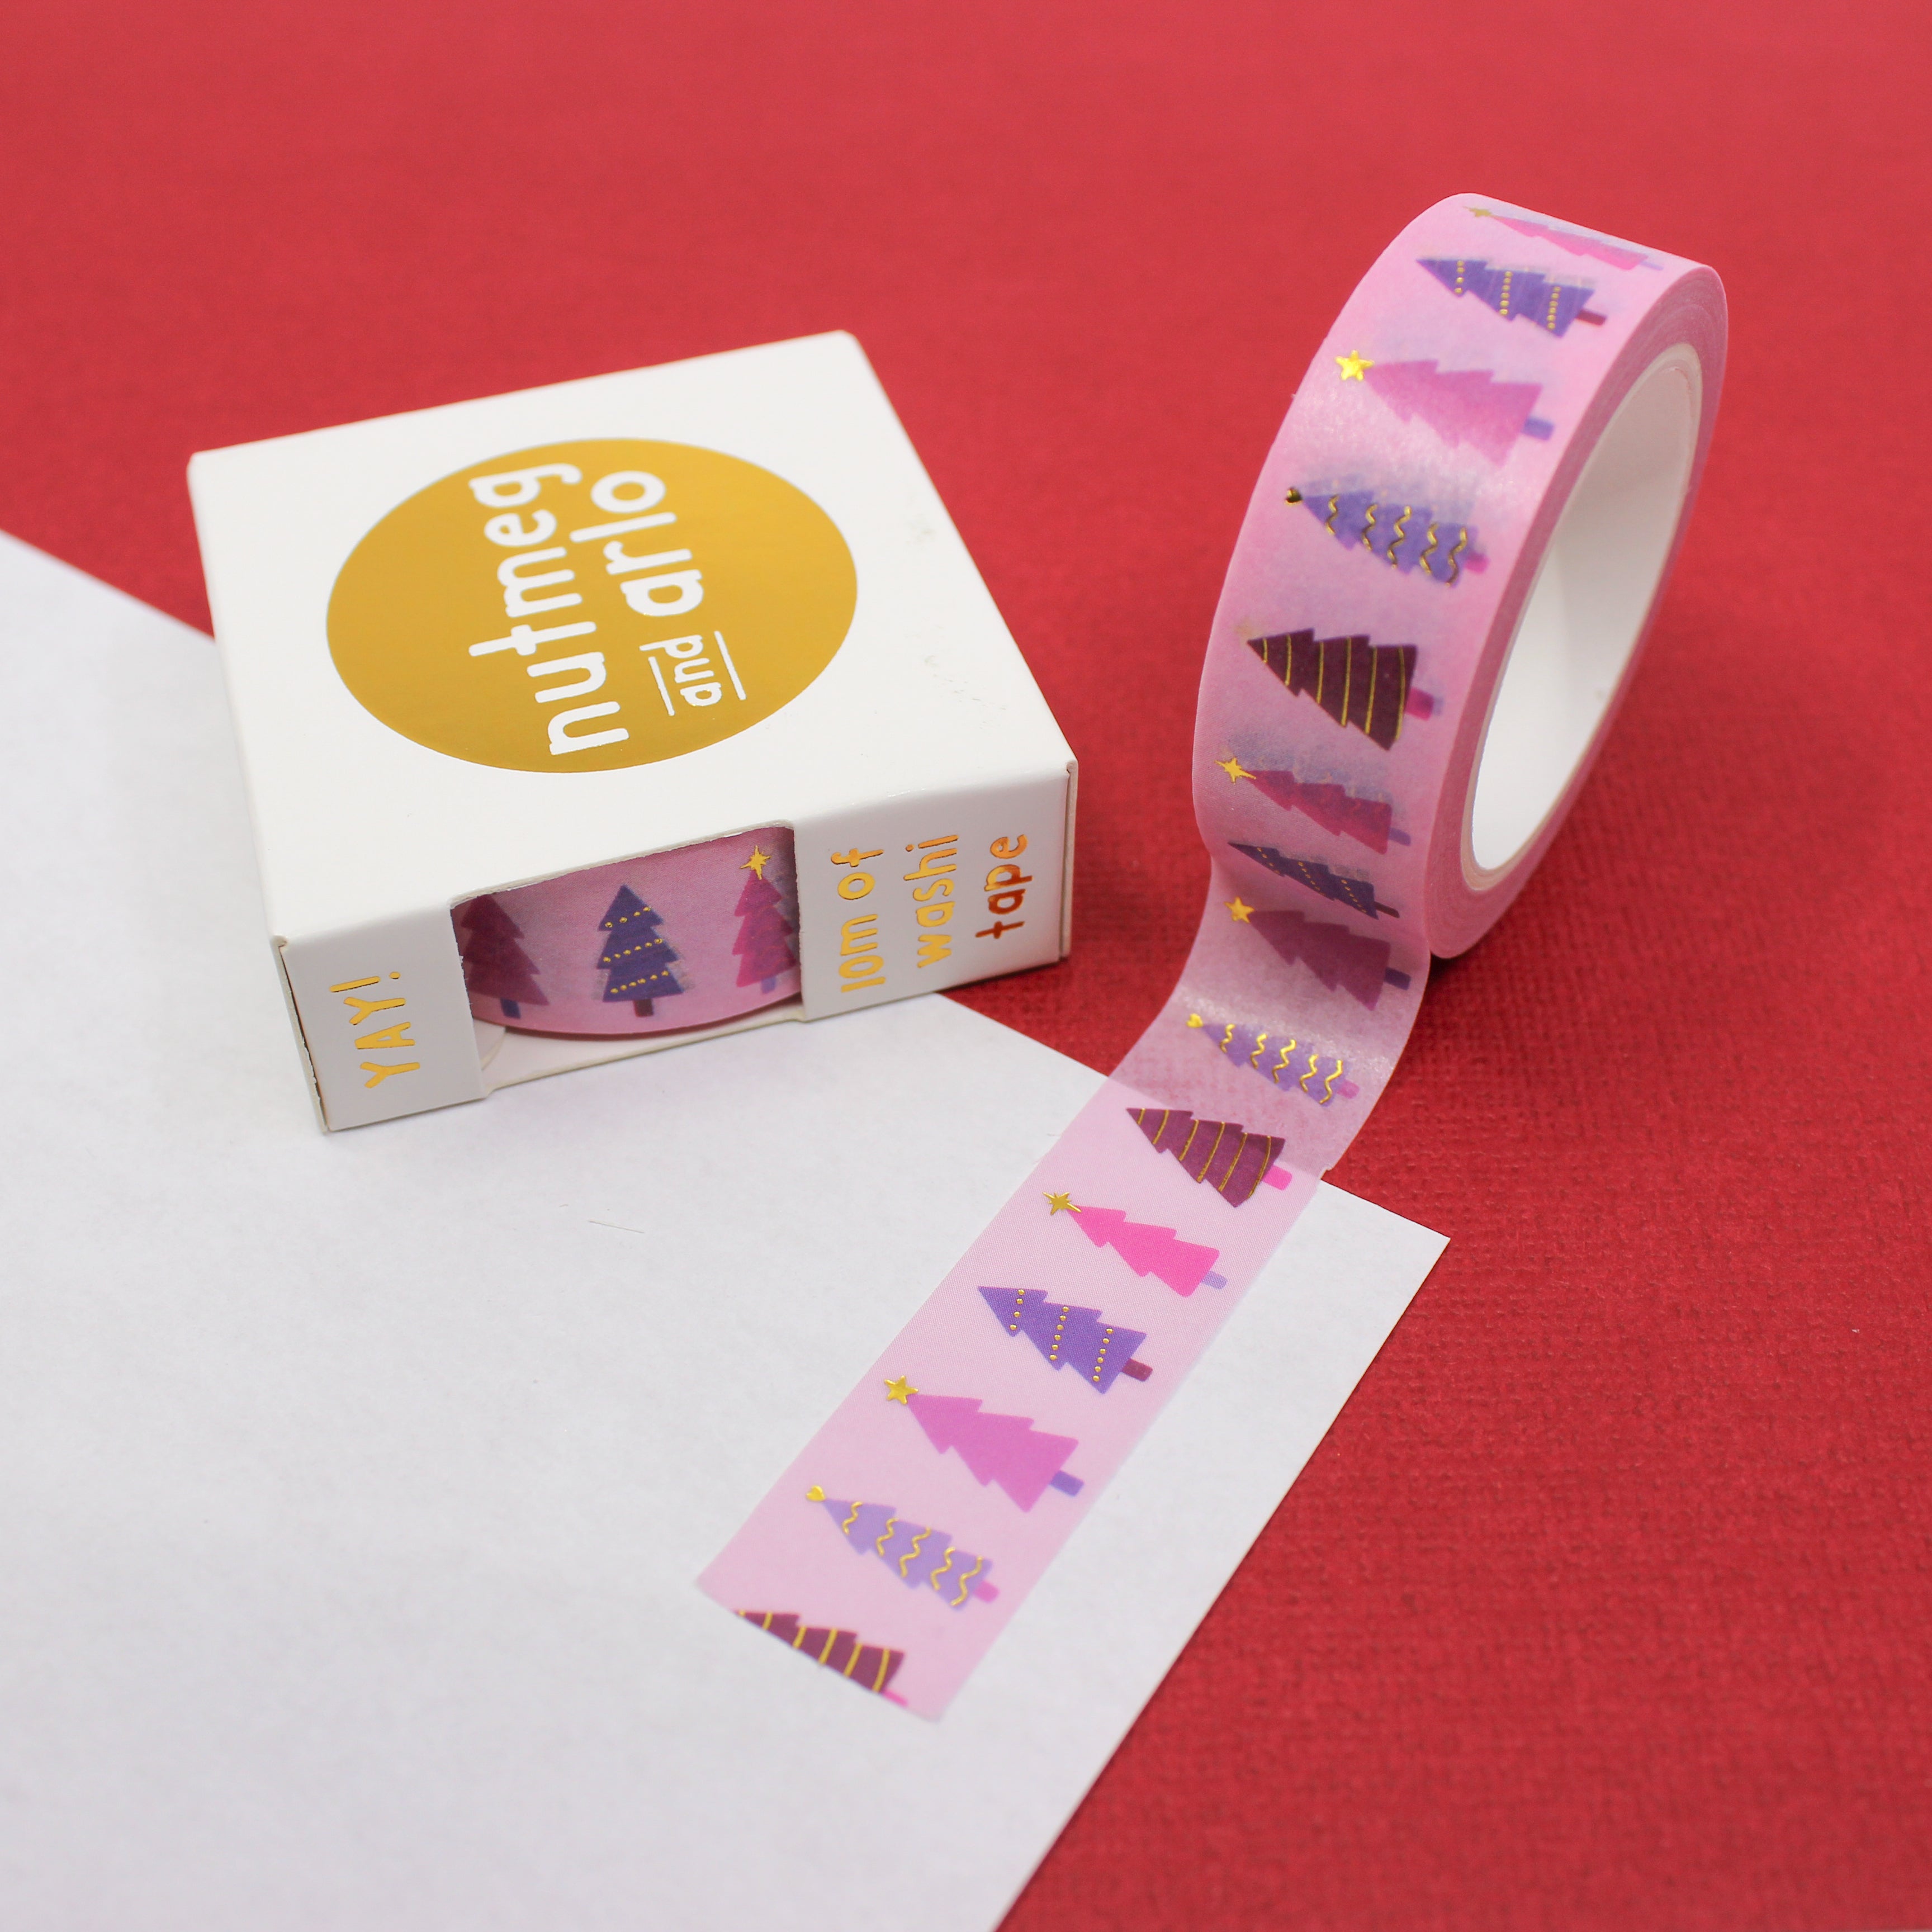 This is a colorful Christmas trees themed washi tape from BBB Supplies Craft Shop